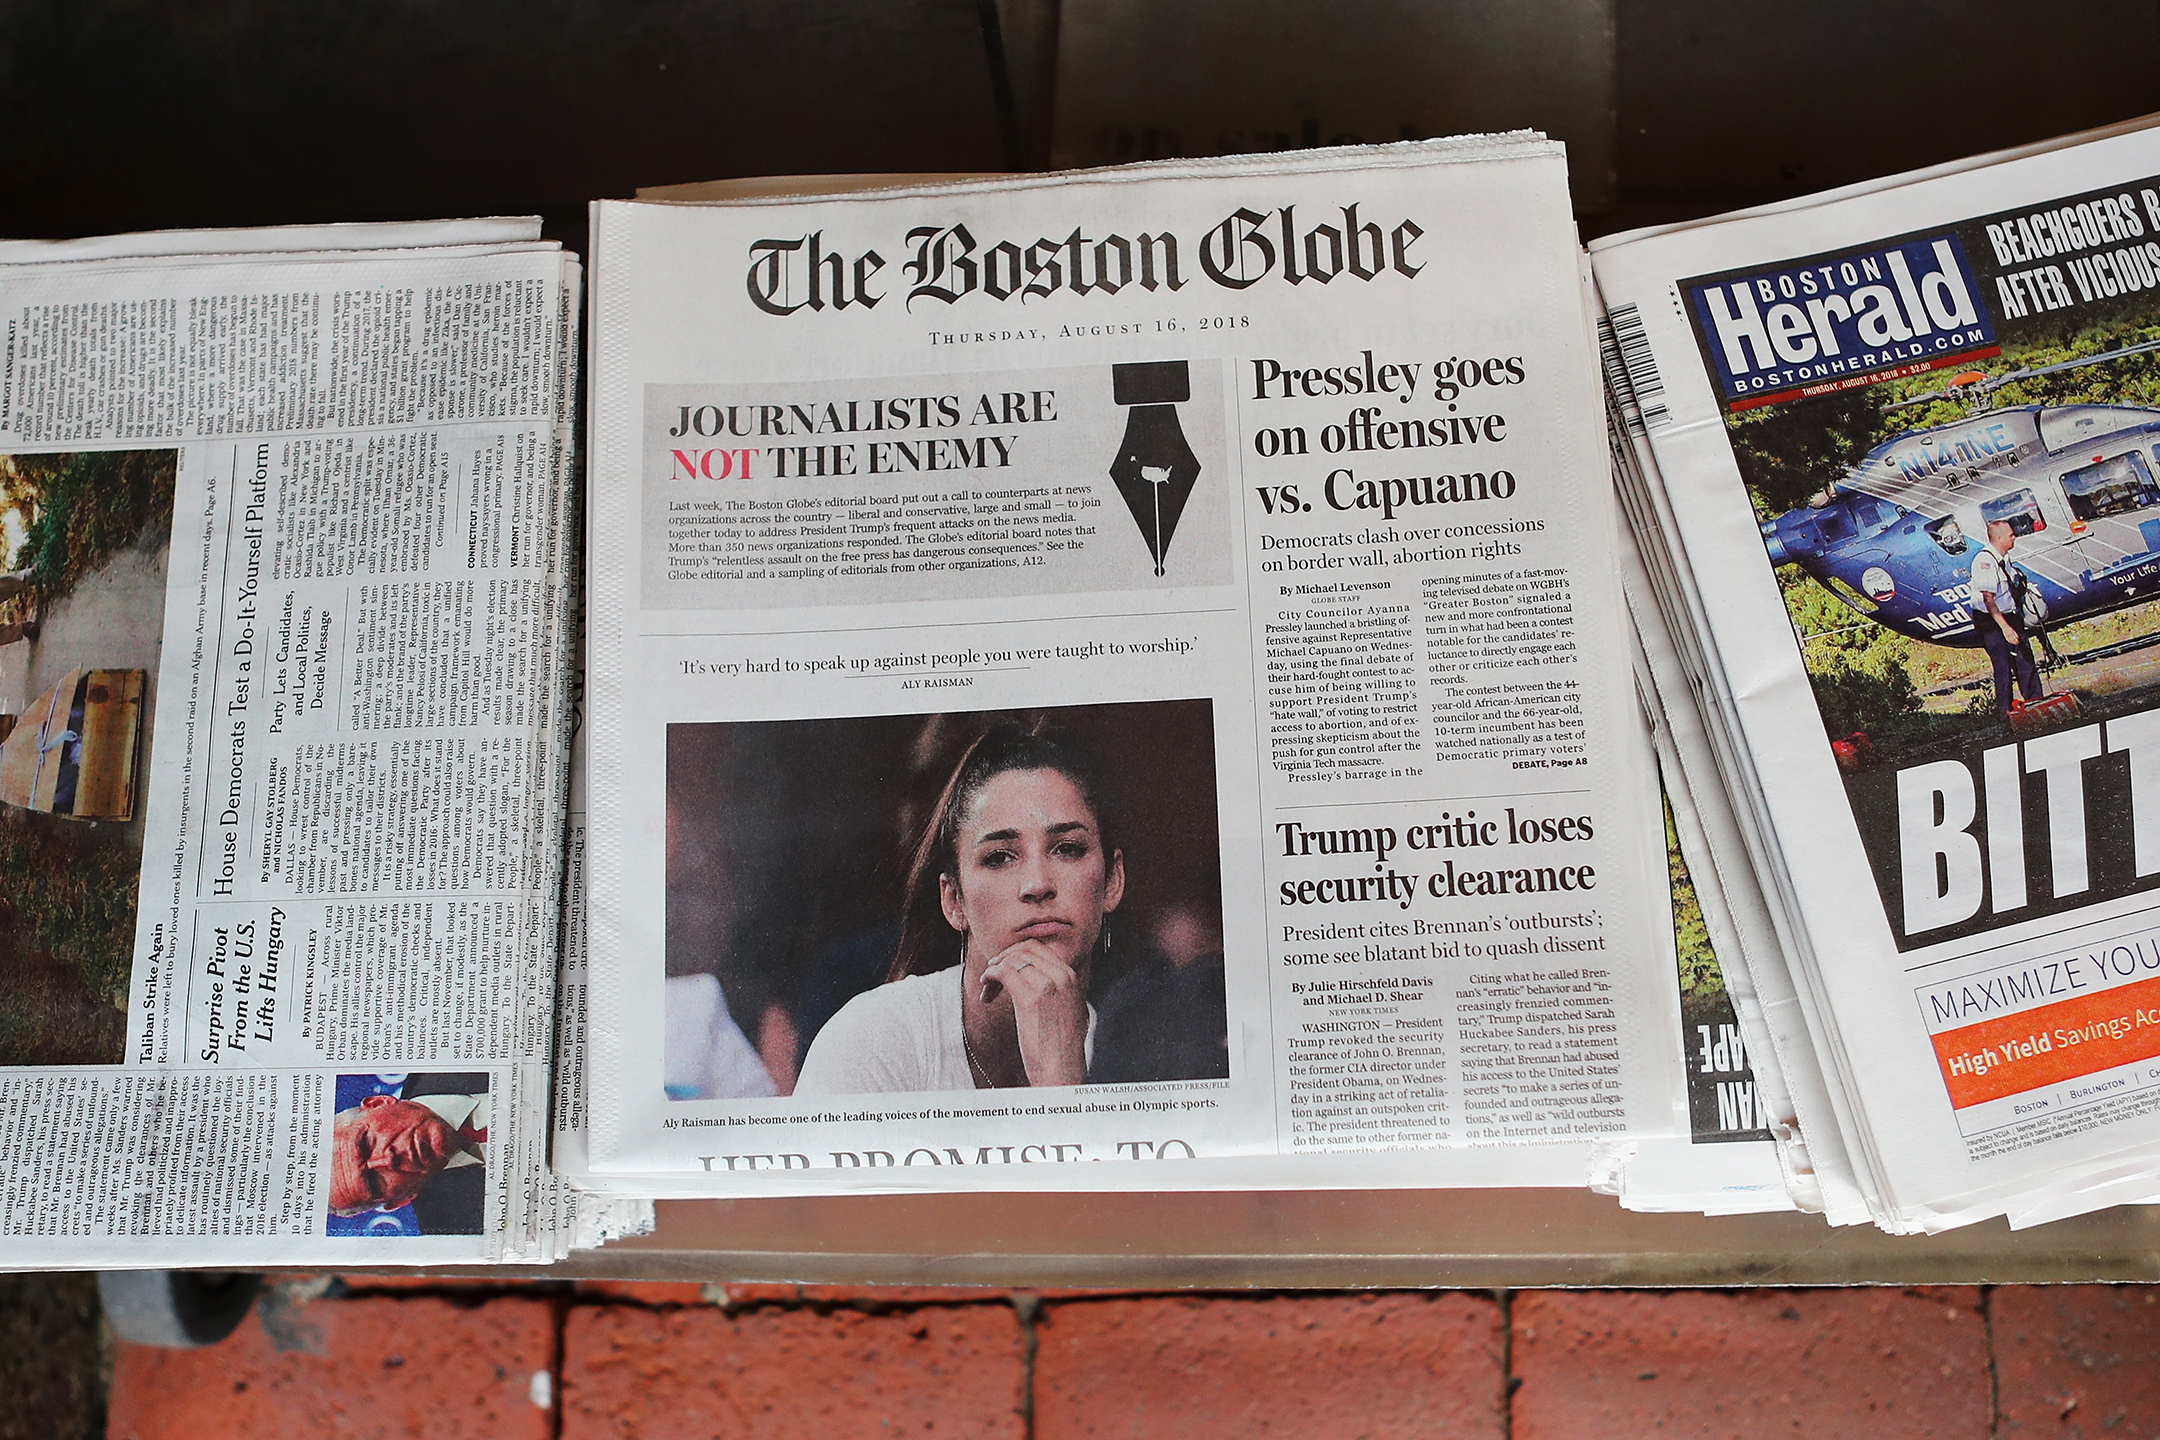 A row of newspapers with the boston globe in the middle with the headline journalists are not the enemy